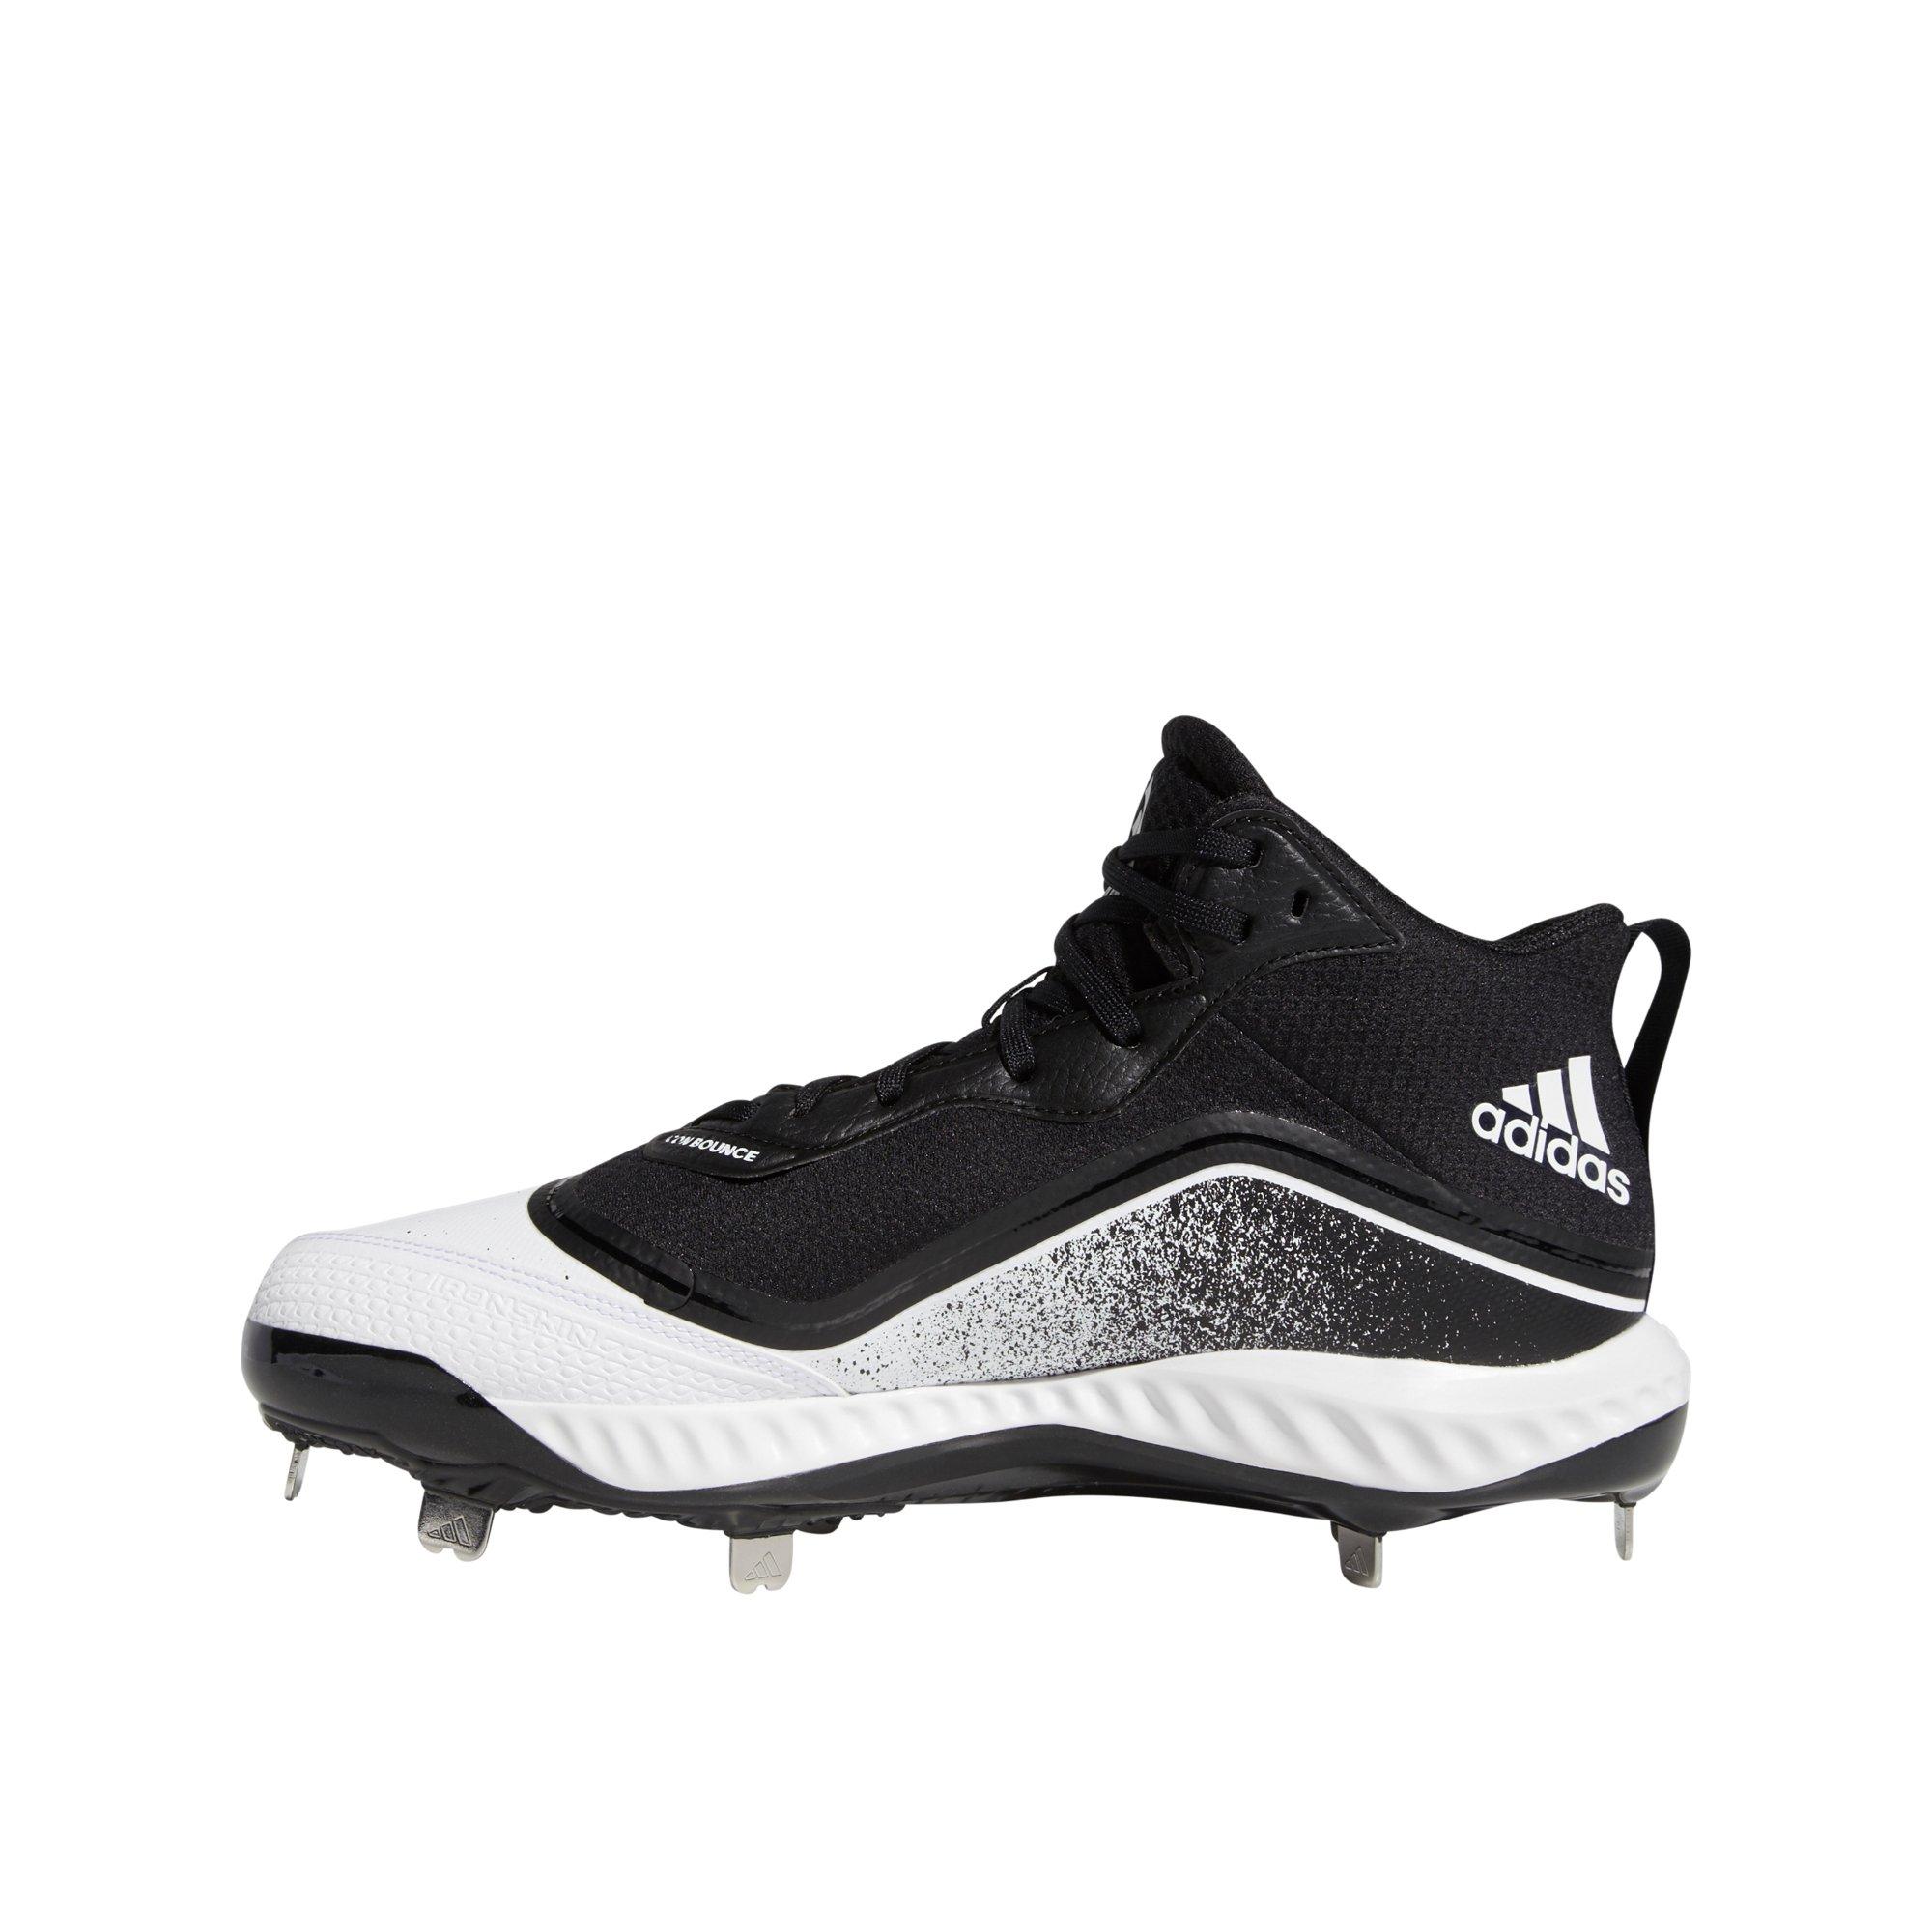 icon v mid cleats